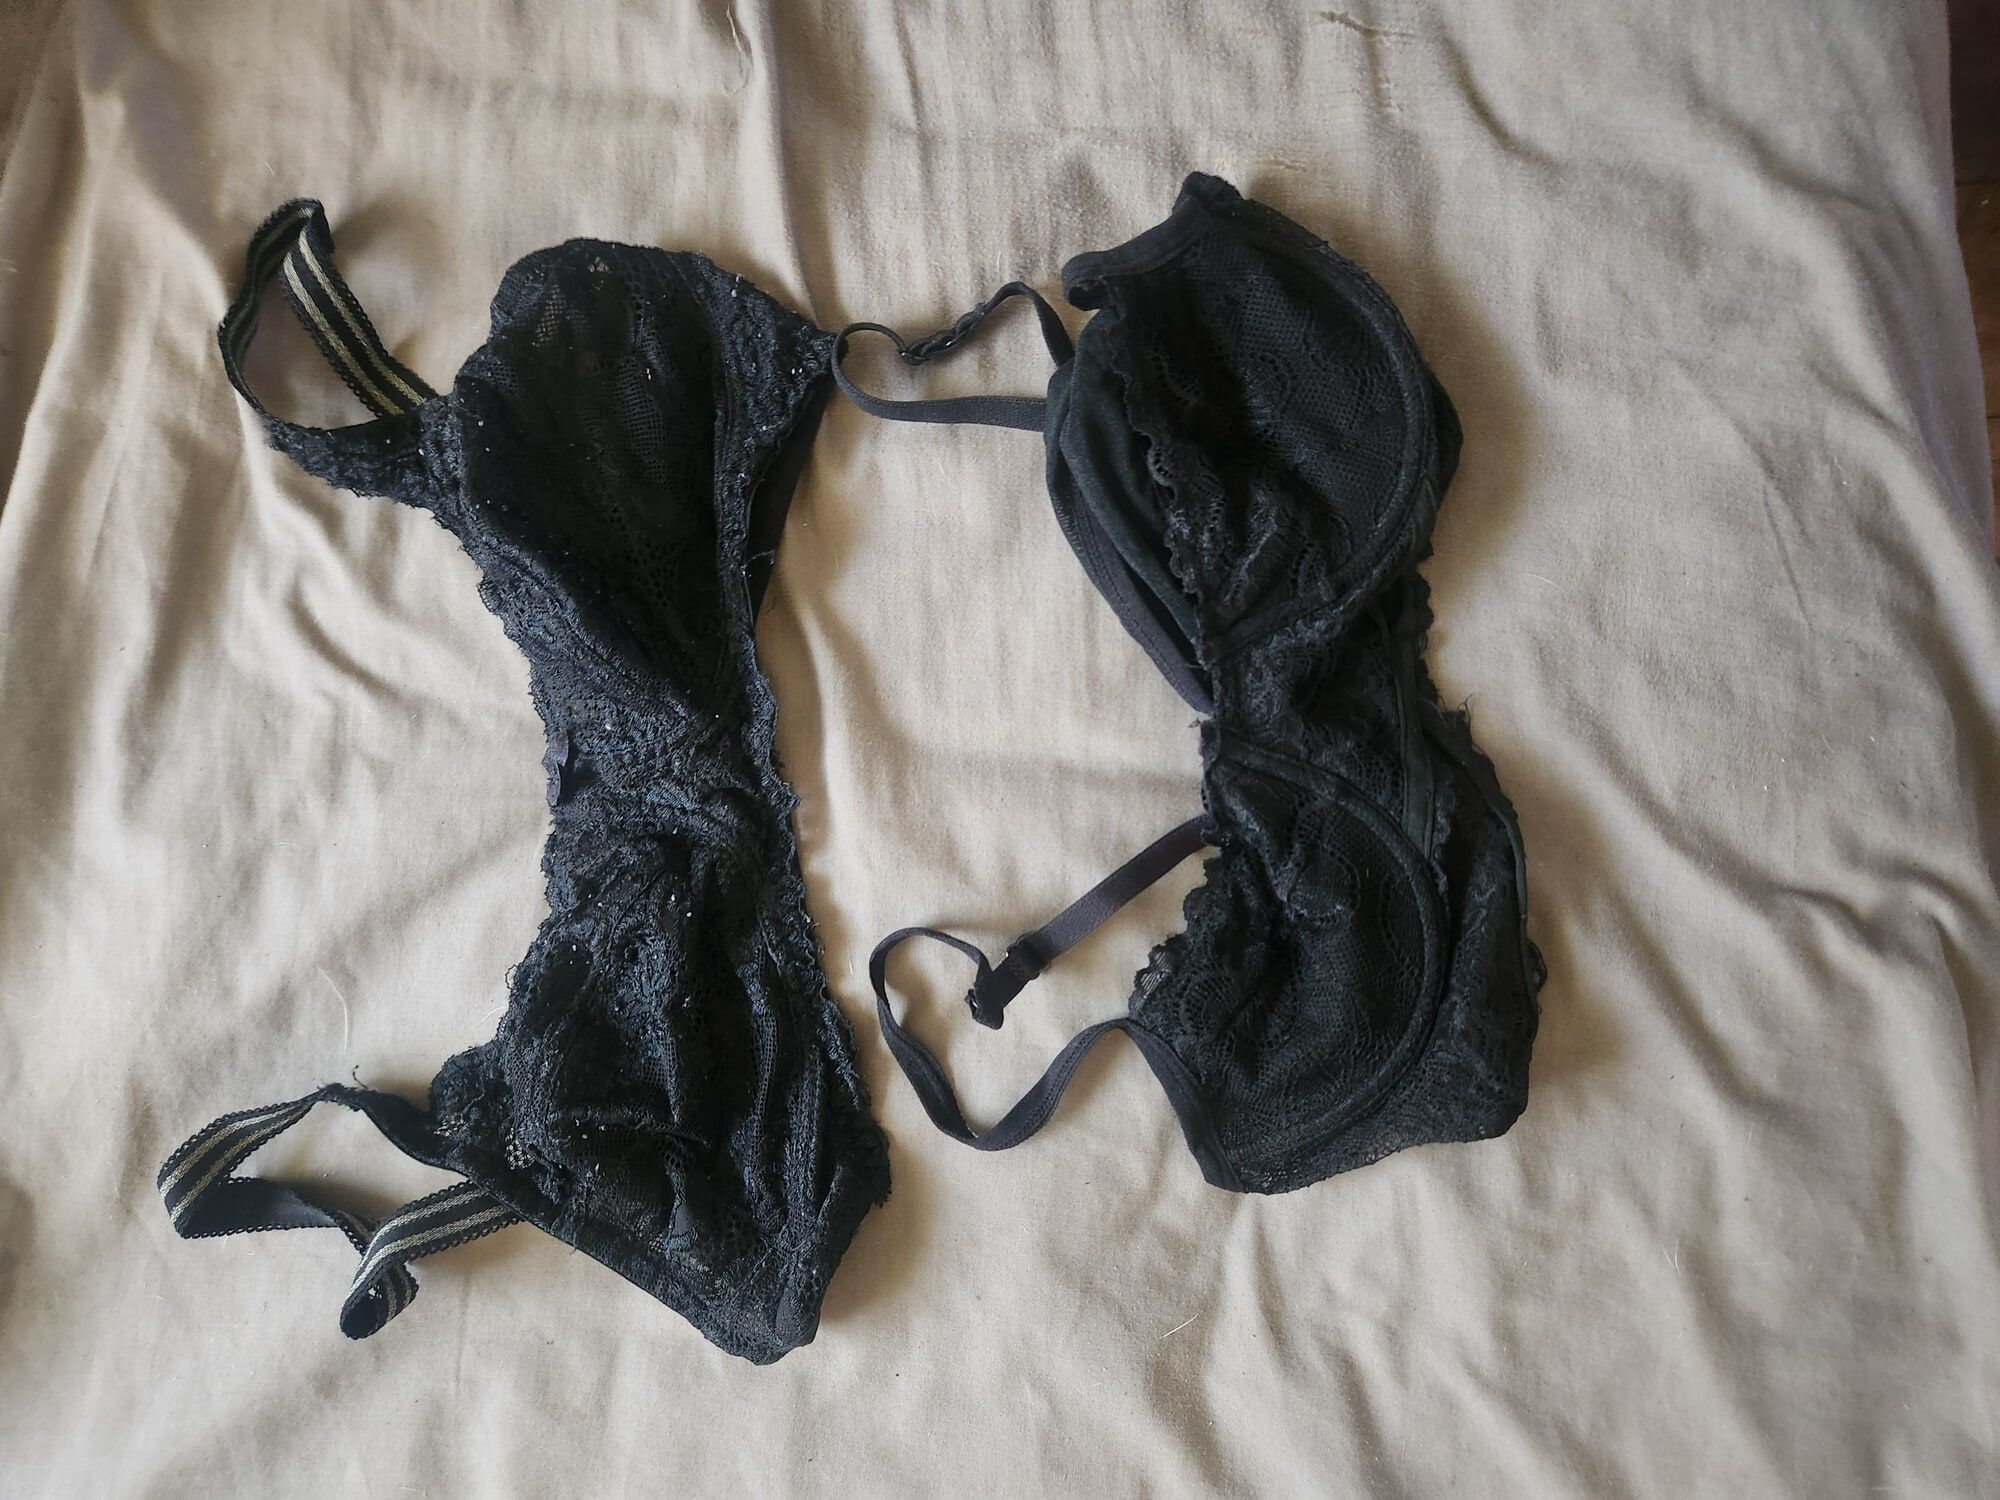 Some of my sexy underwear and bras #3